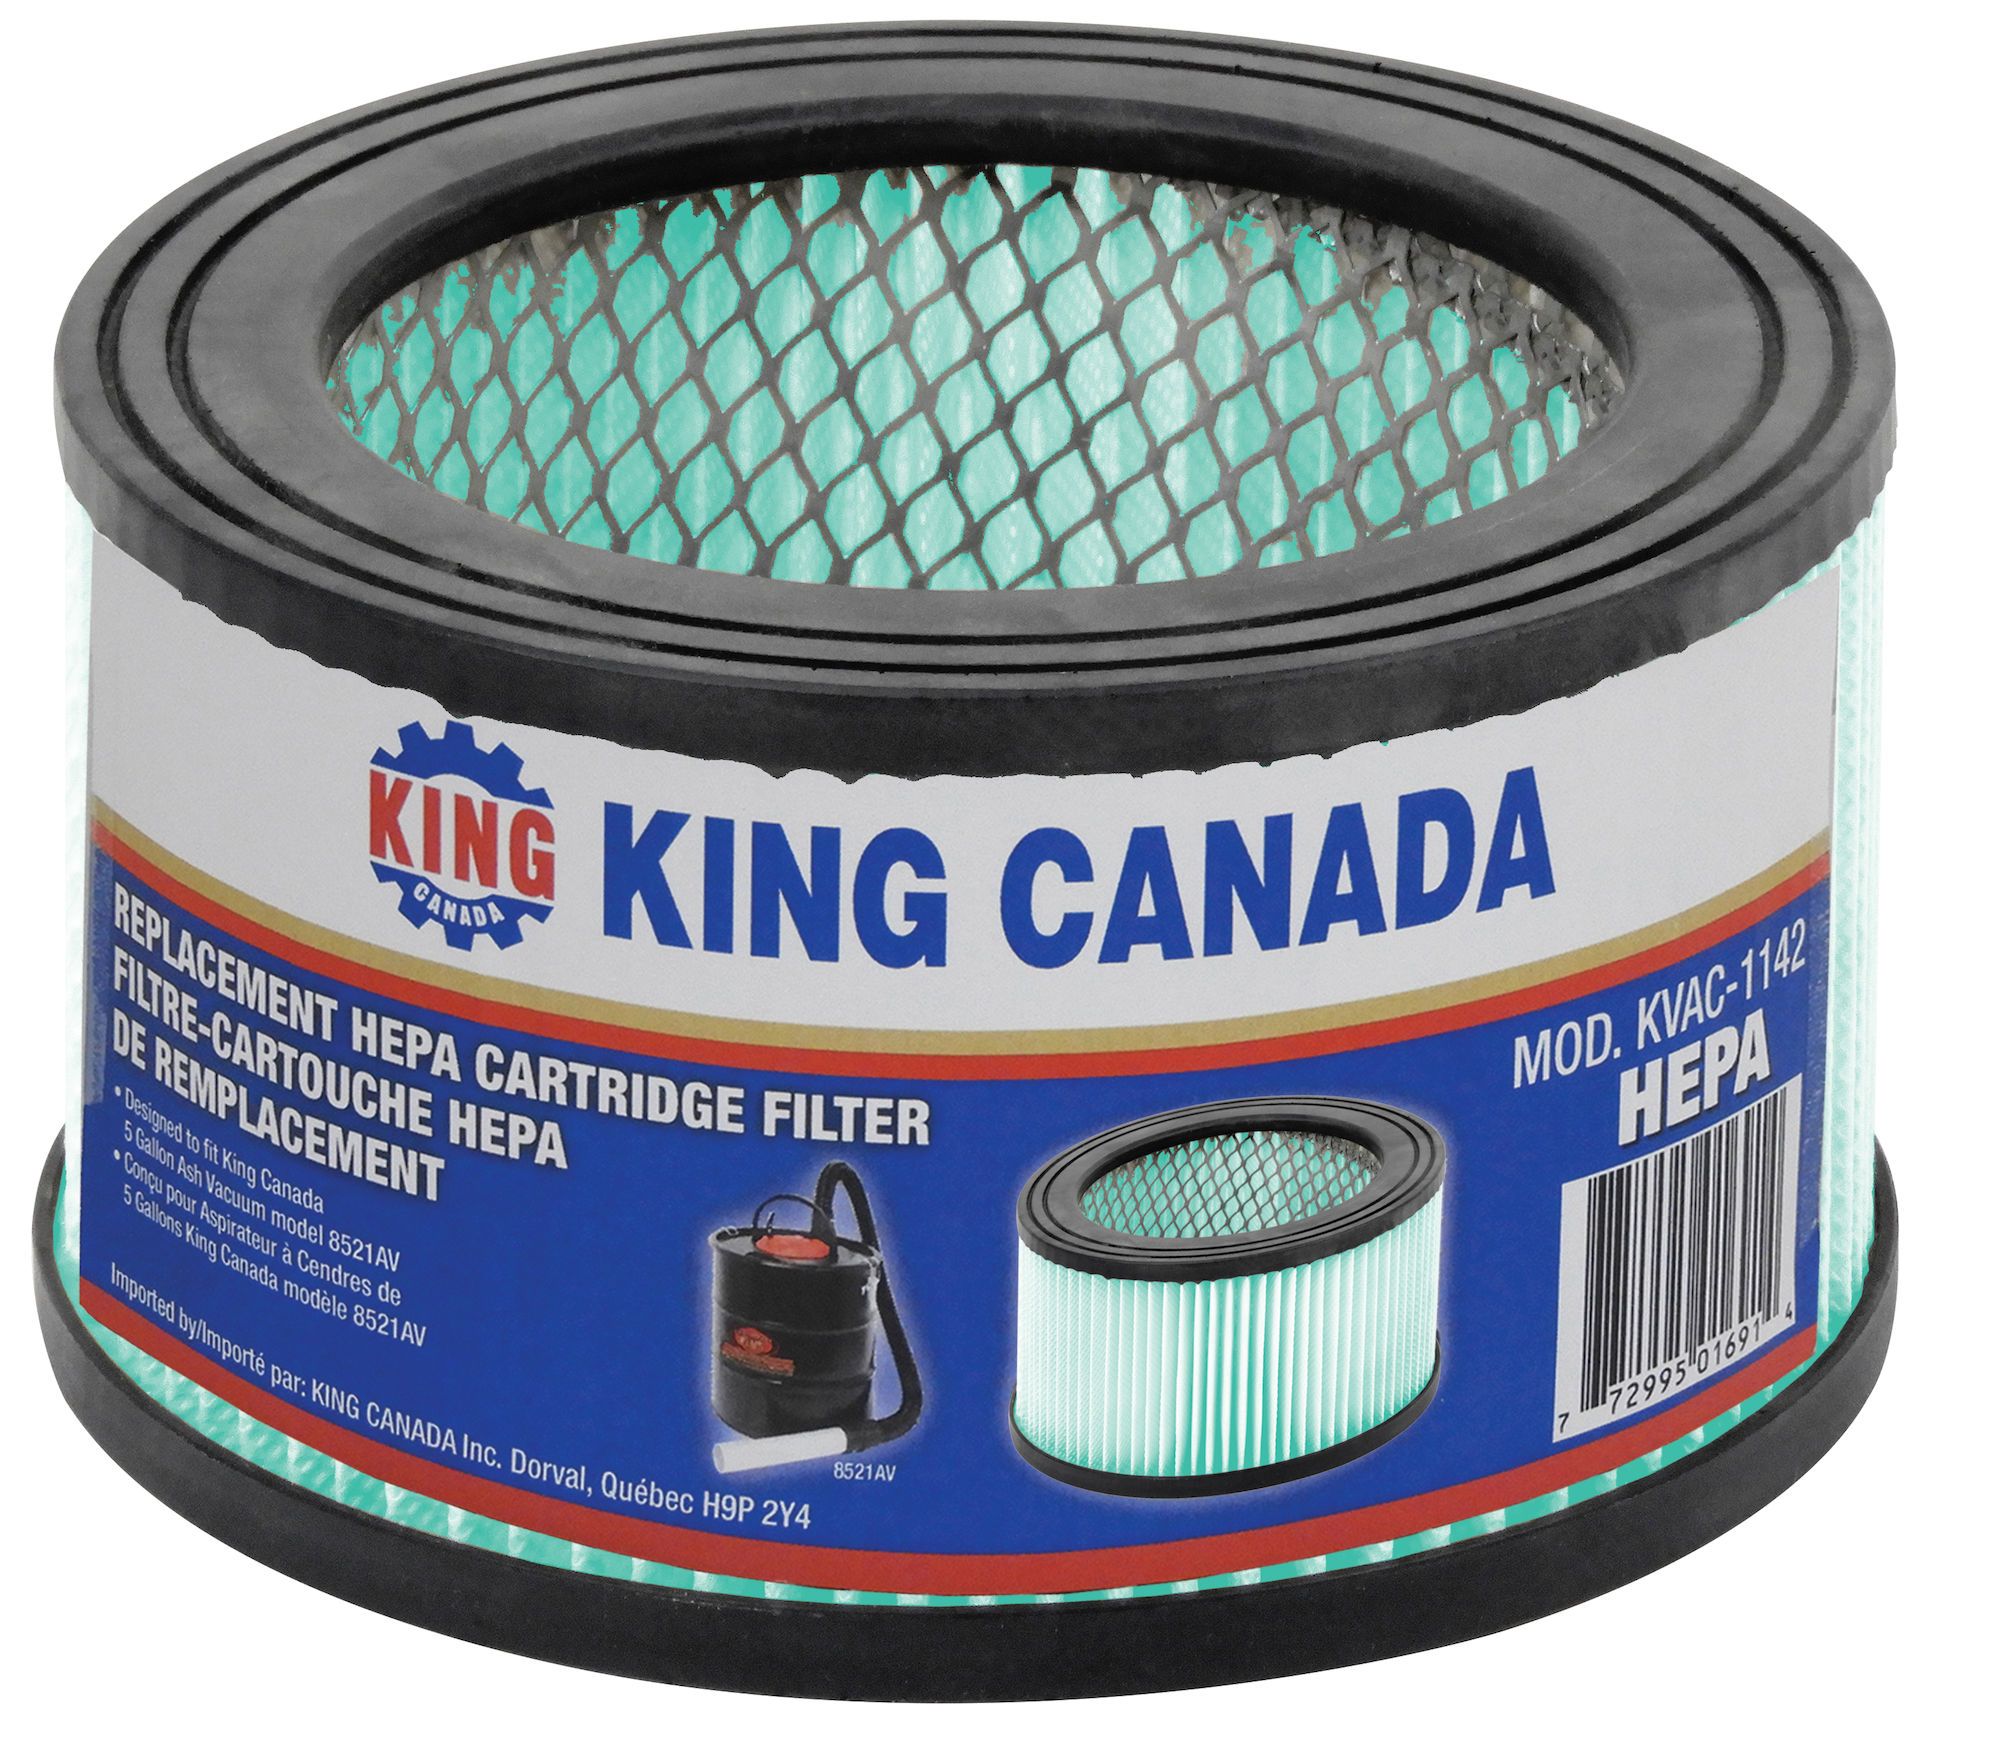 5 GALLON HEPA CARTRIDGE FILTER from KING CANADA